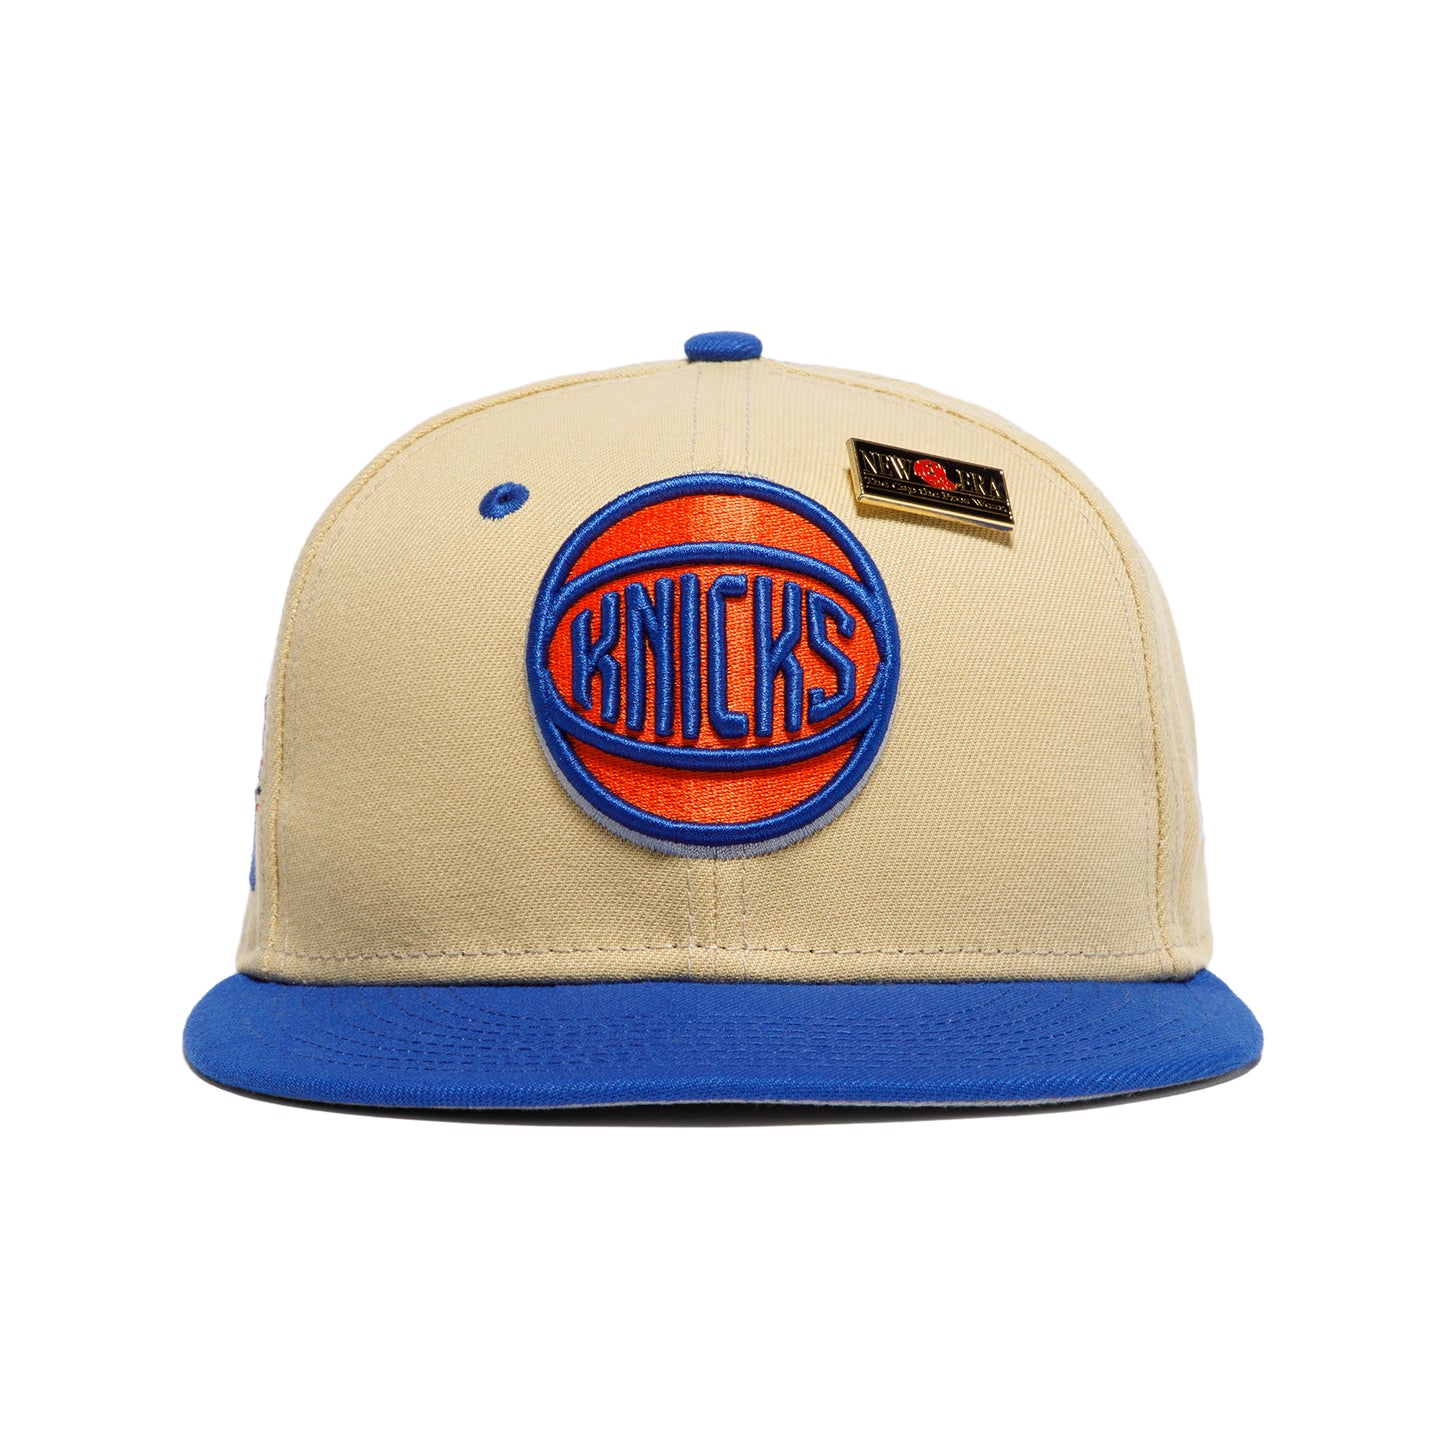 Shop New Era 59Fifty New York Knicks Stateview Fitted Hat 60296541-ERA blue